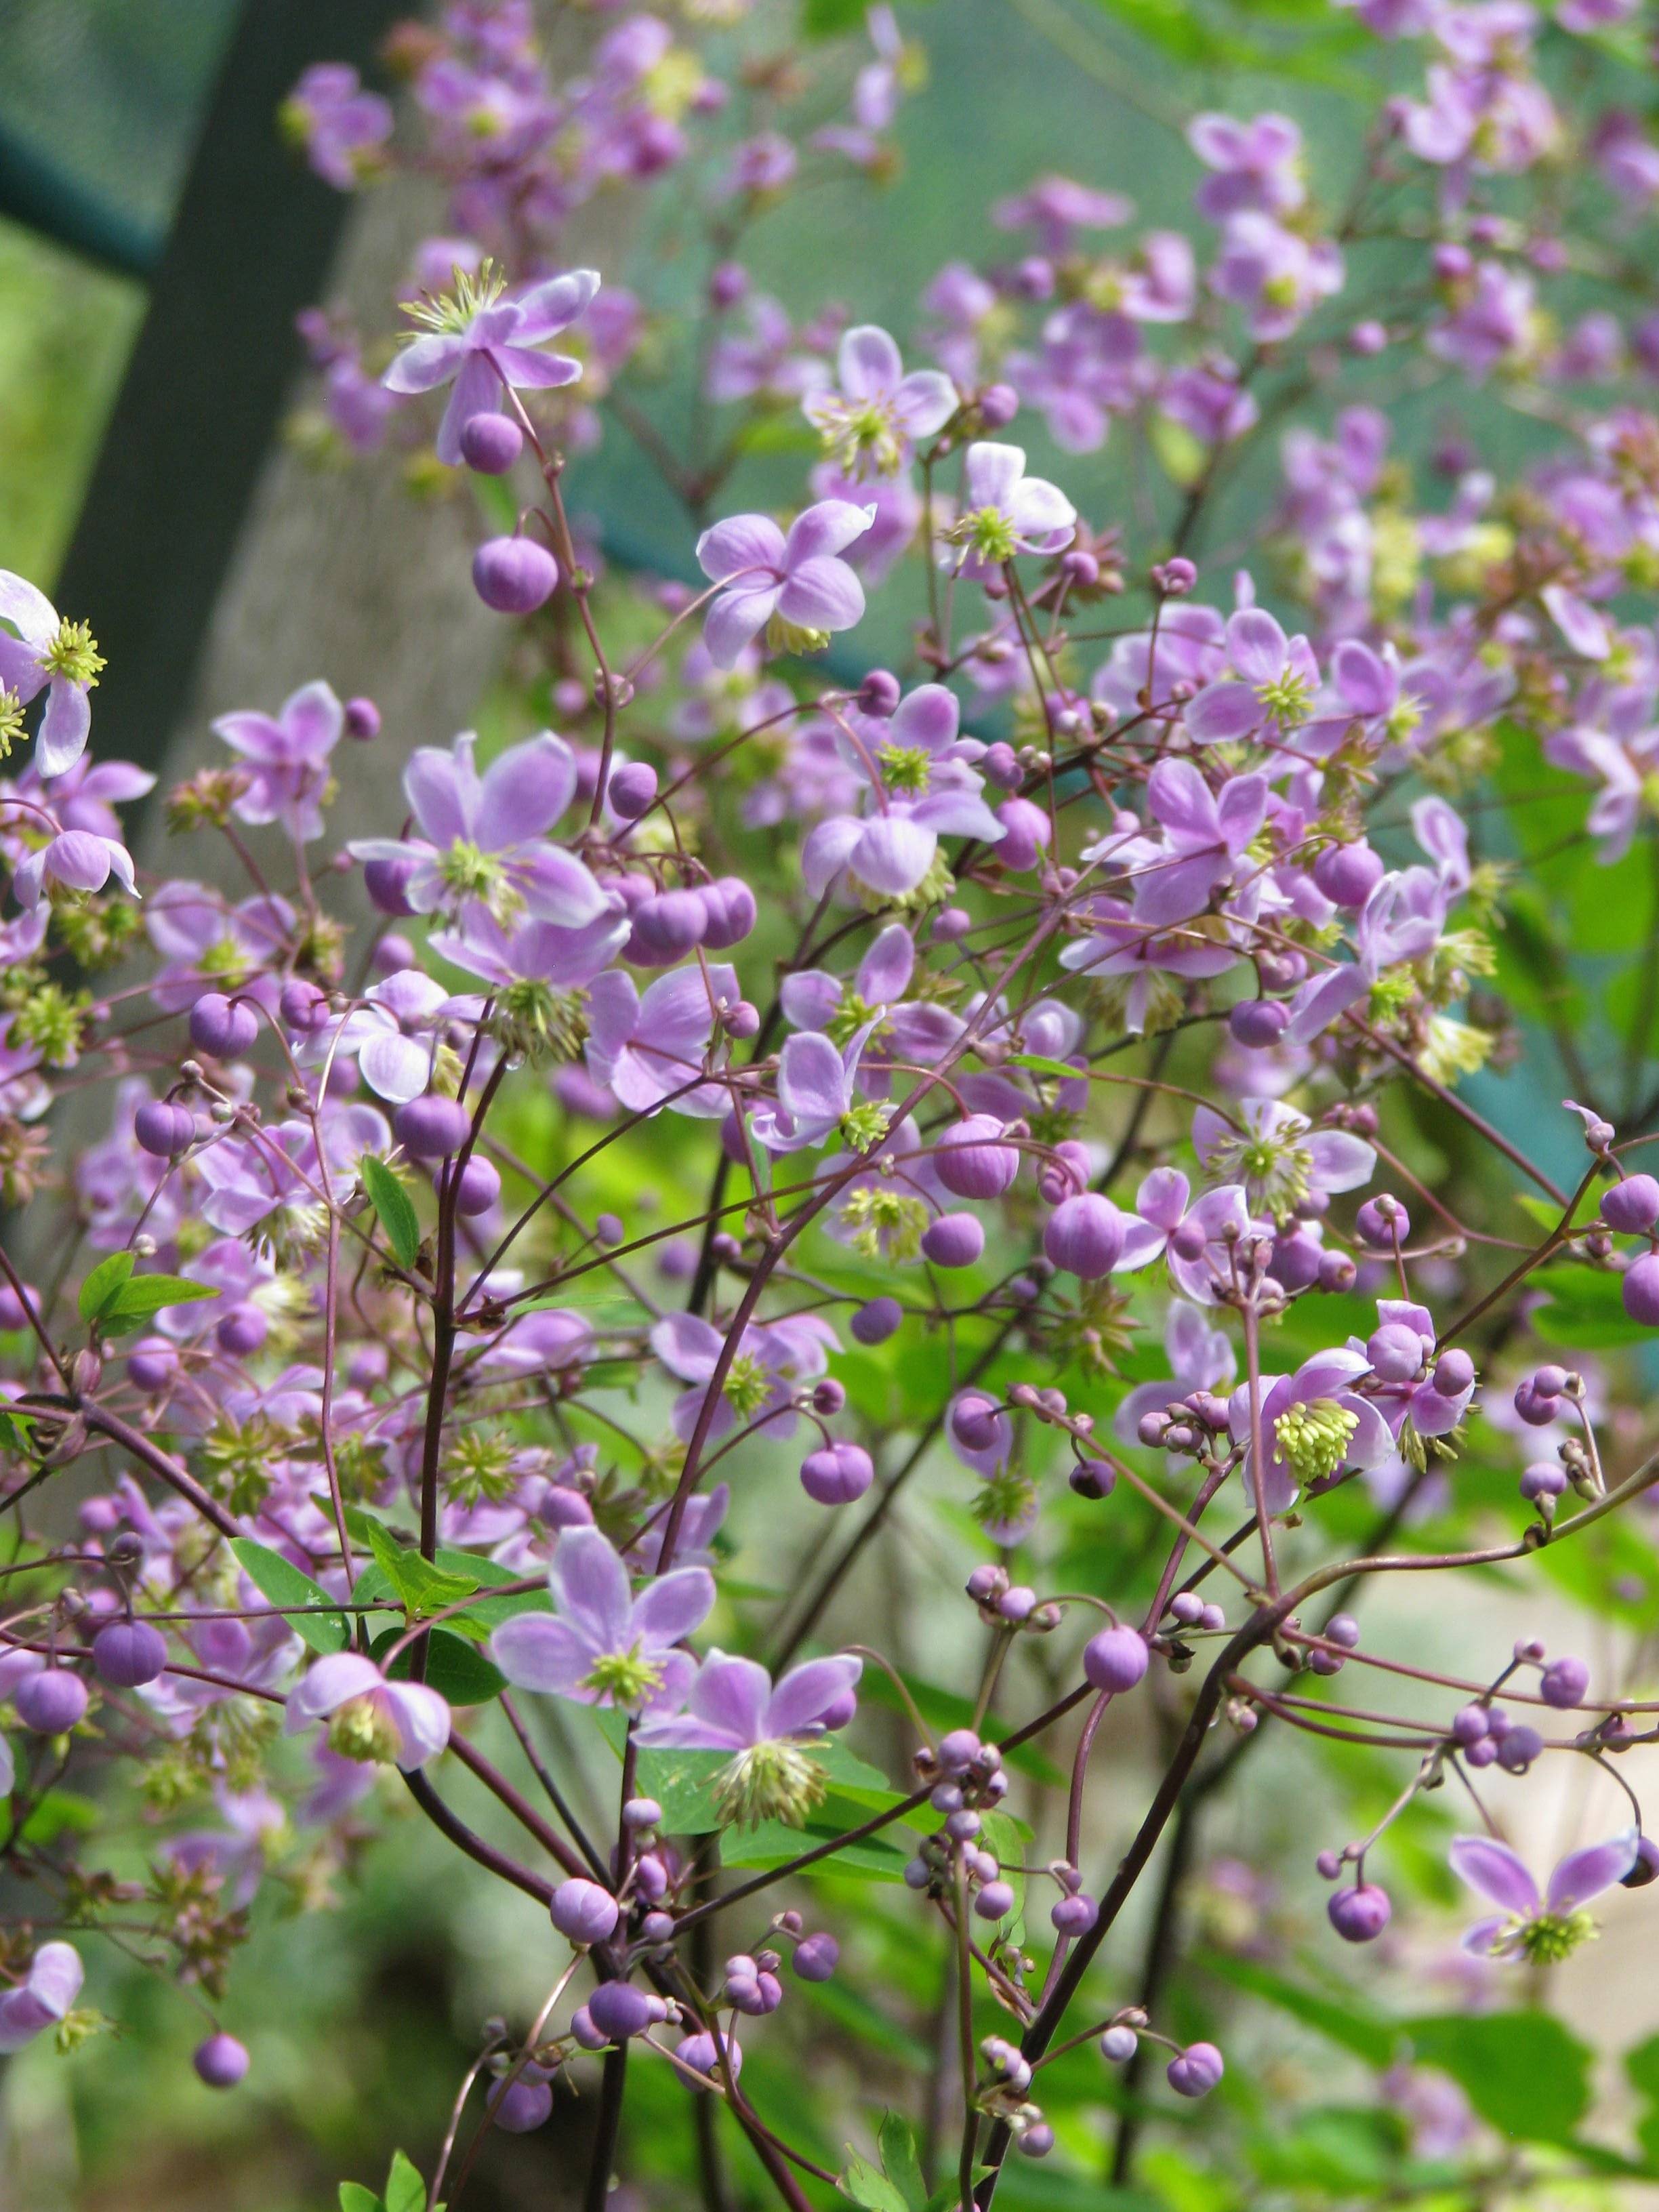 light-purple flowers with lime center and purple buds on dark-brown stems